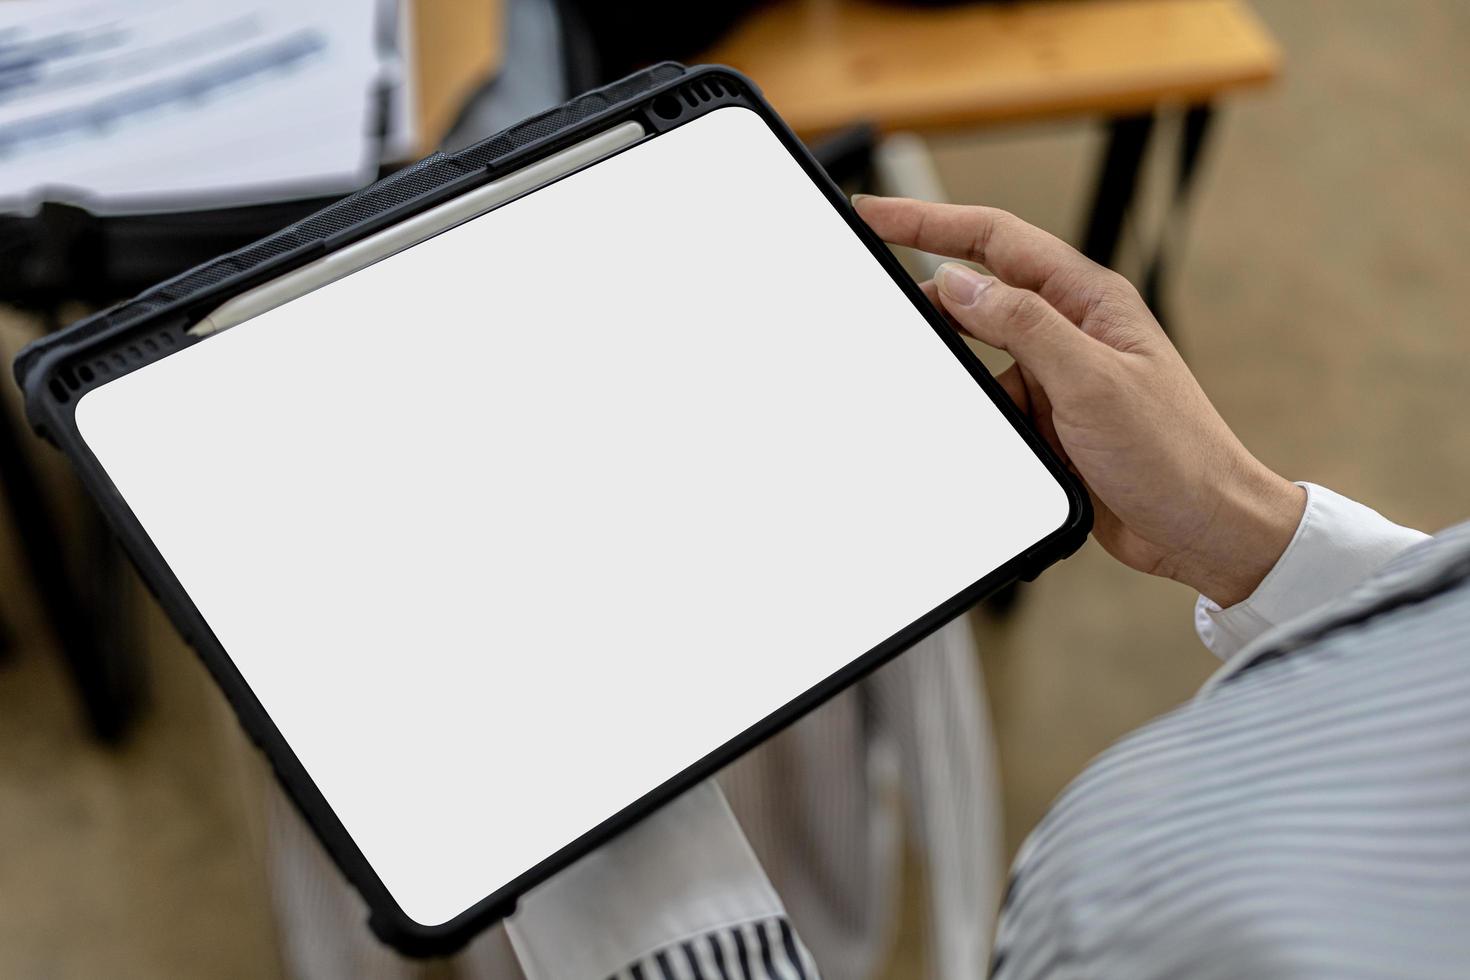 Blank screen of tablet, person holding tab and looking at blank tablet screen, mockup screen for further editing can be used for a variety of tasks. copy space. photo